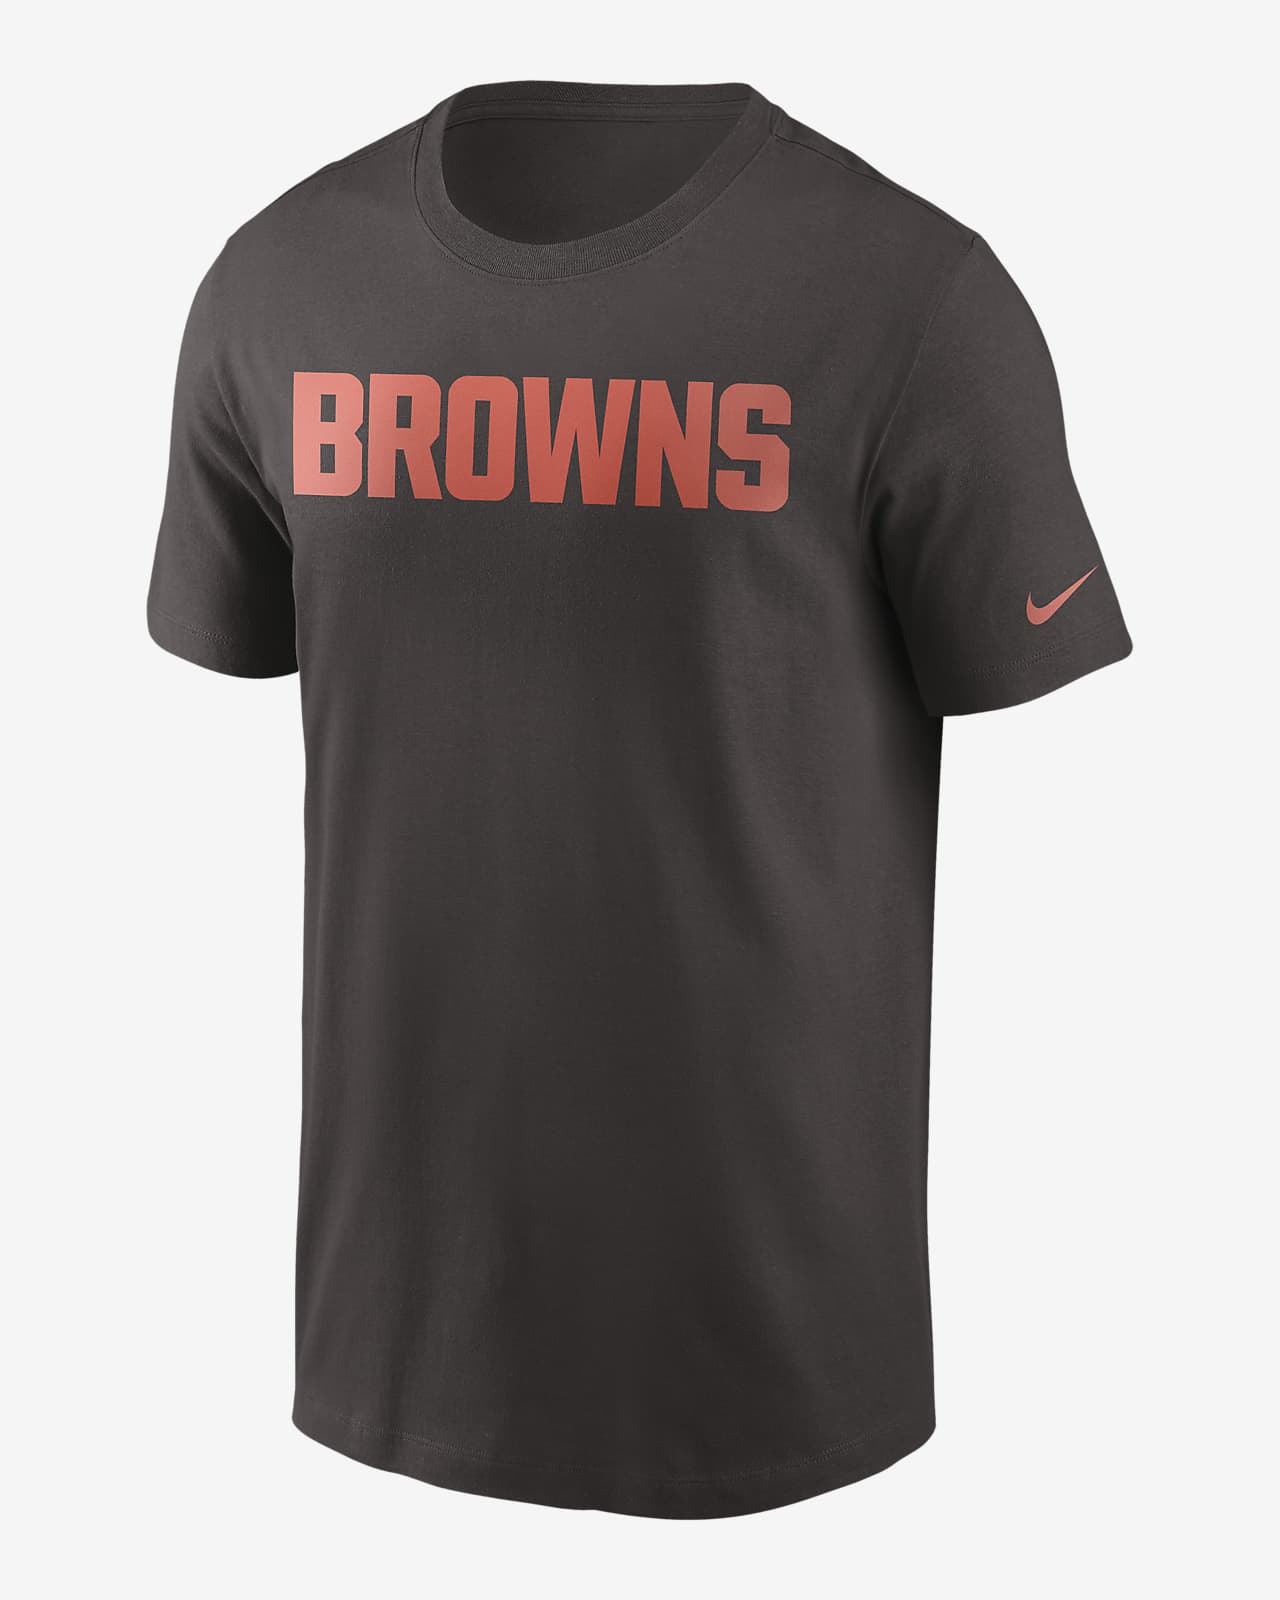 browns jerseys for sale